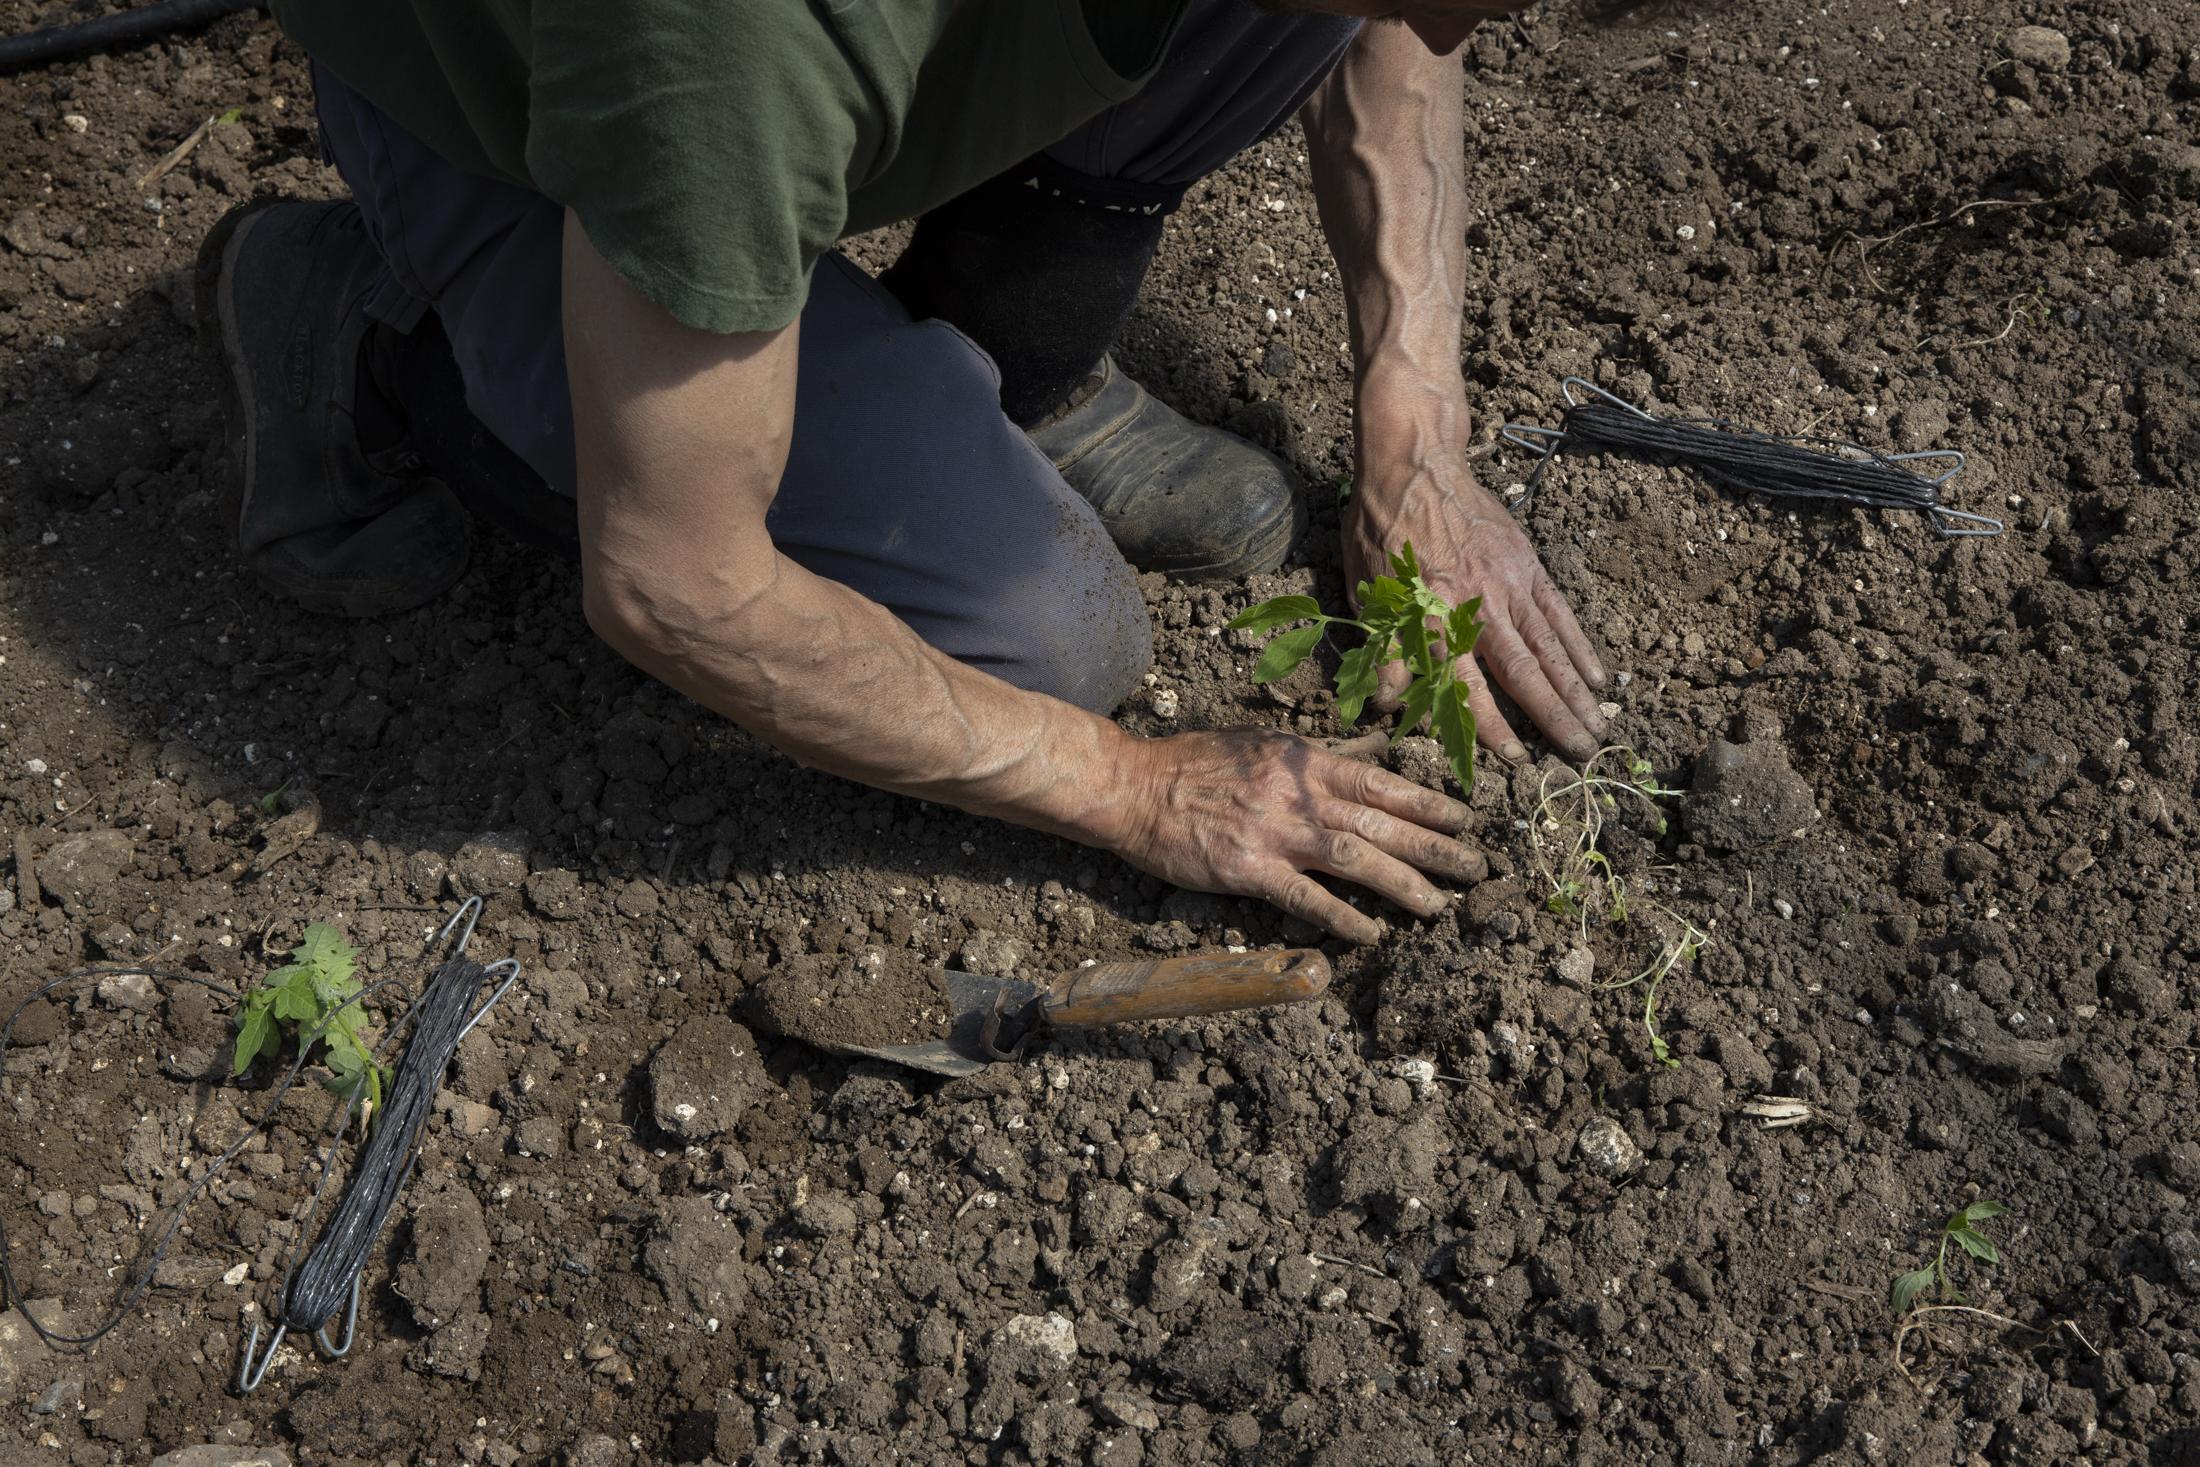 A Possible Agriculture - Yves-Anne Auffret, 50, handly prepare the soil and plant...